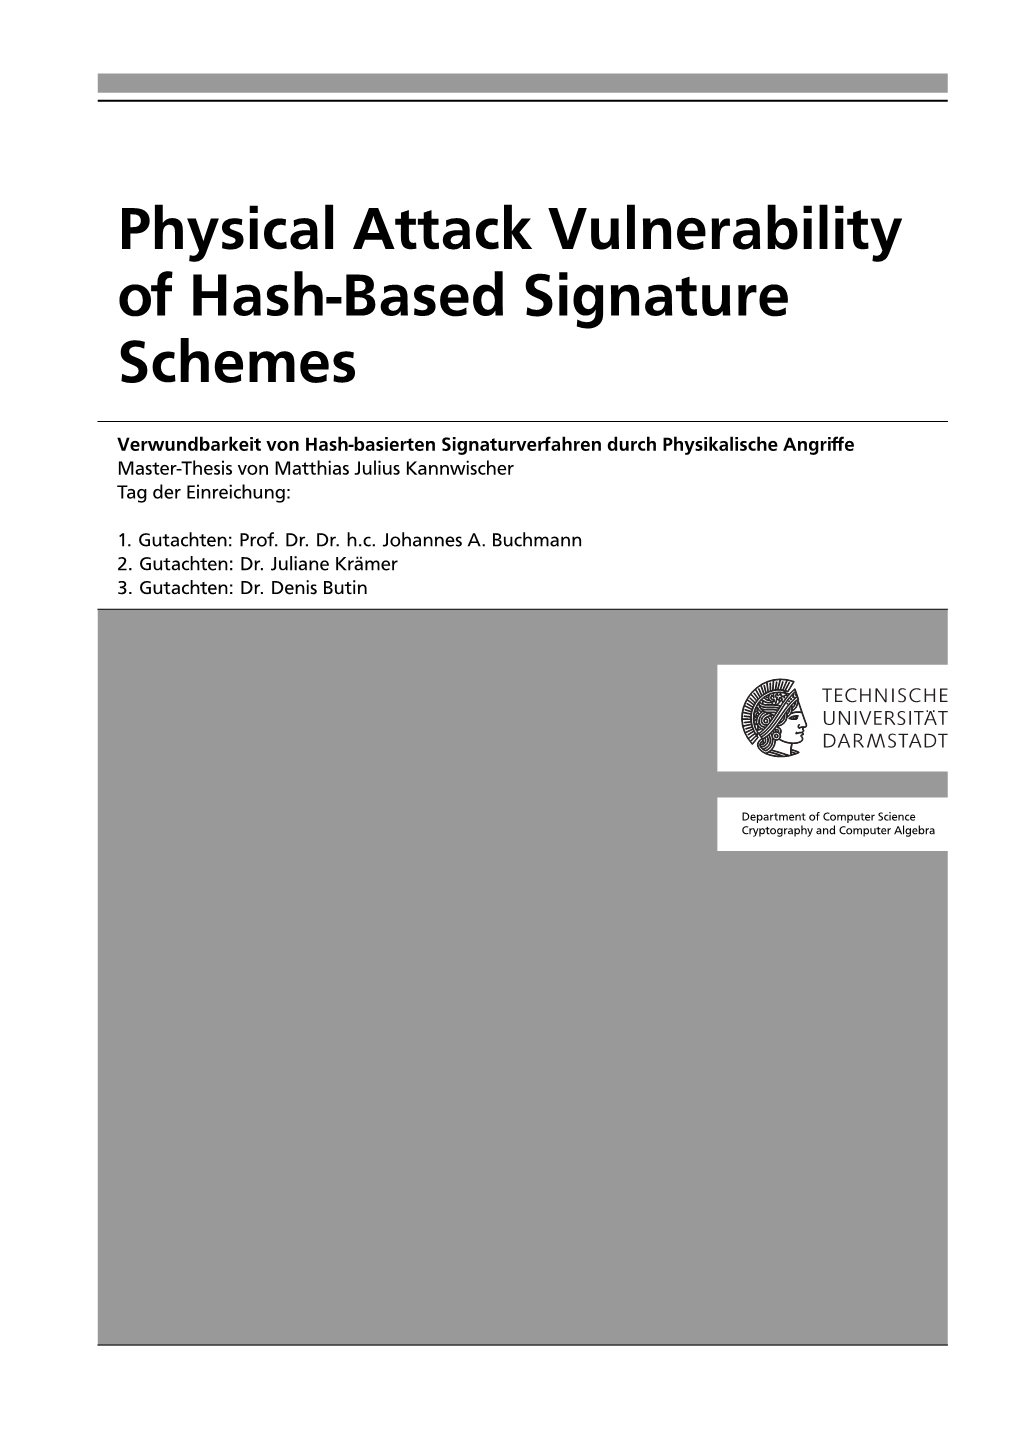 Physical Attack Vulnerability of Hash-Based Signature Schemes